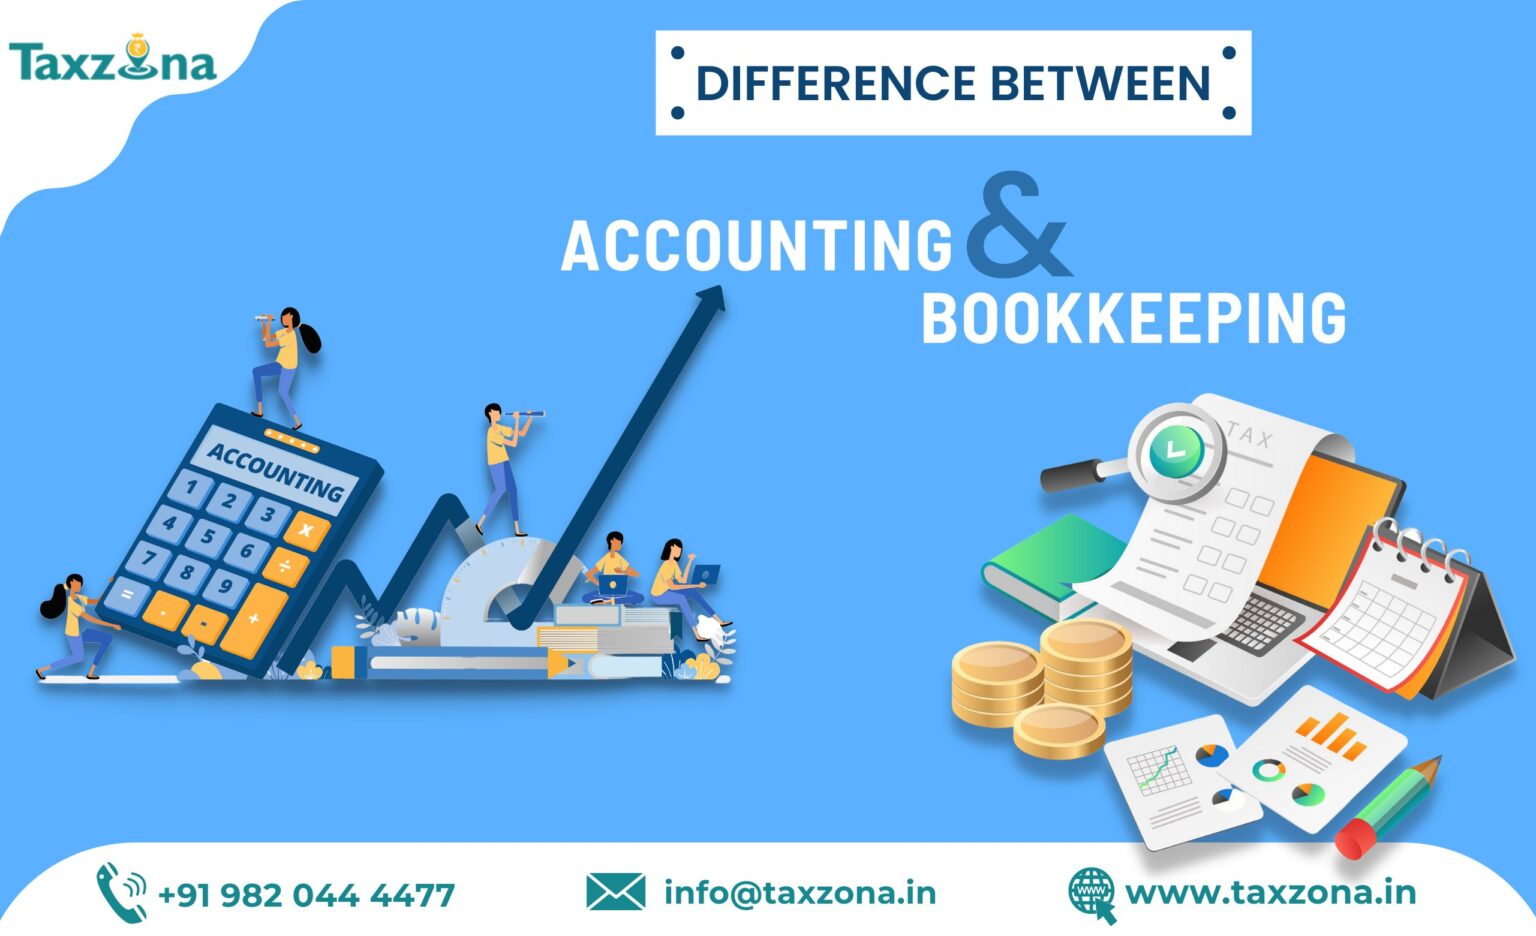 What Is The Difference Between Accounting & Bookkeeping